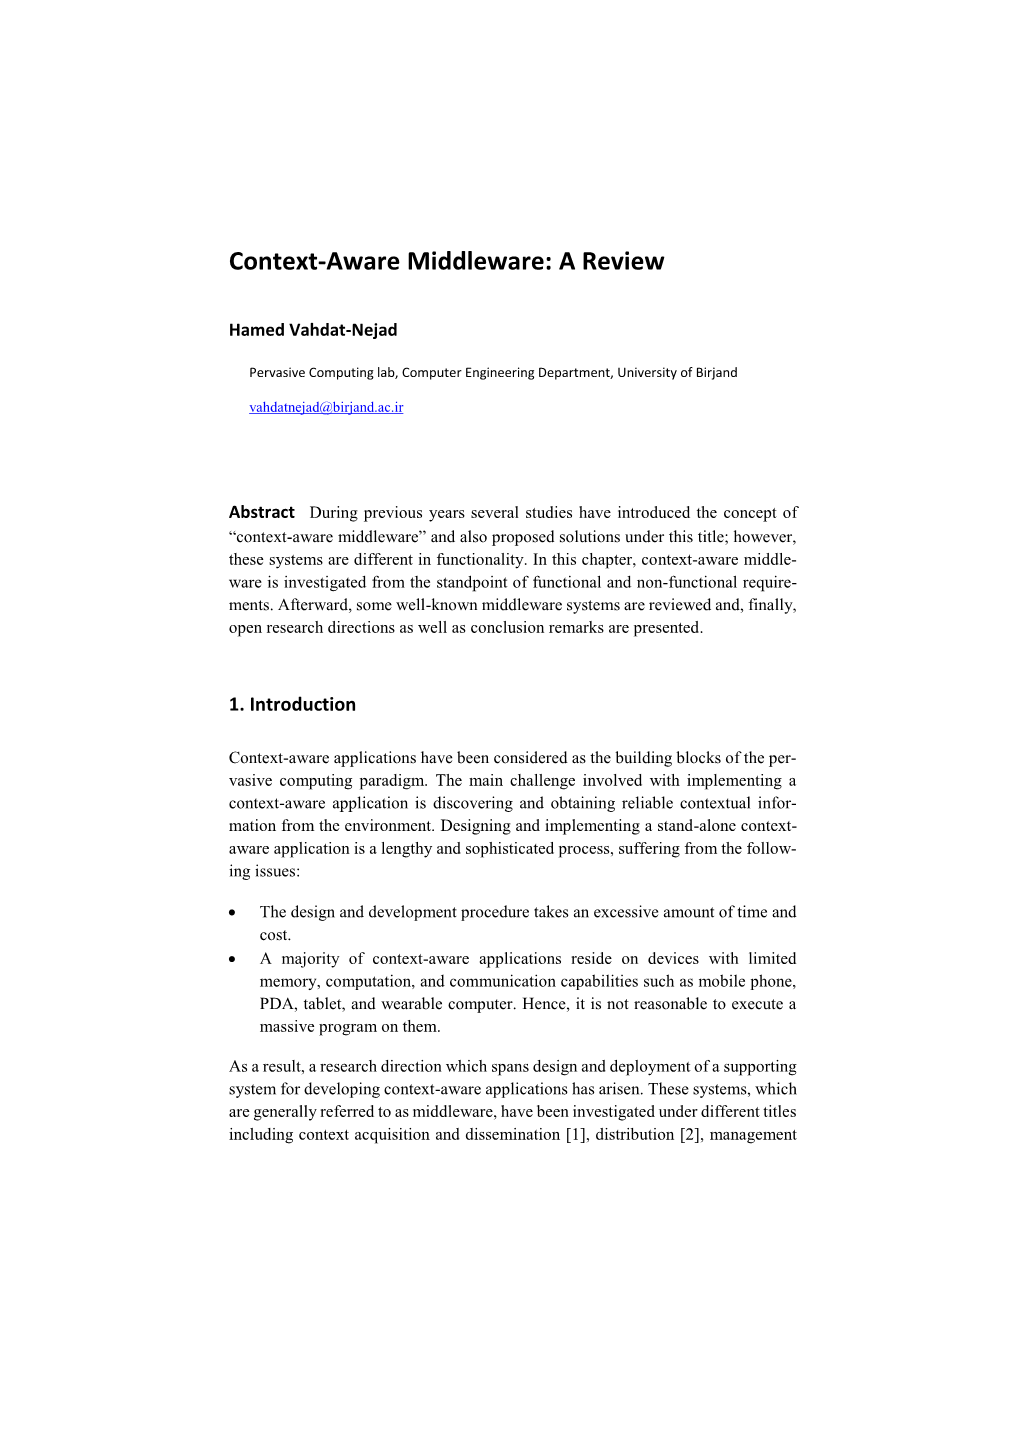 Context-Aware Middleware: a Review